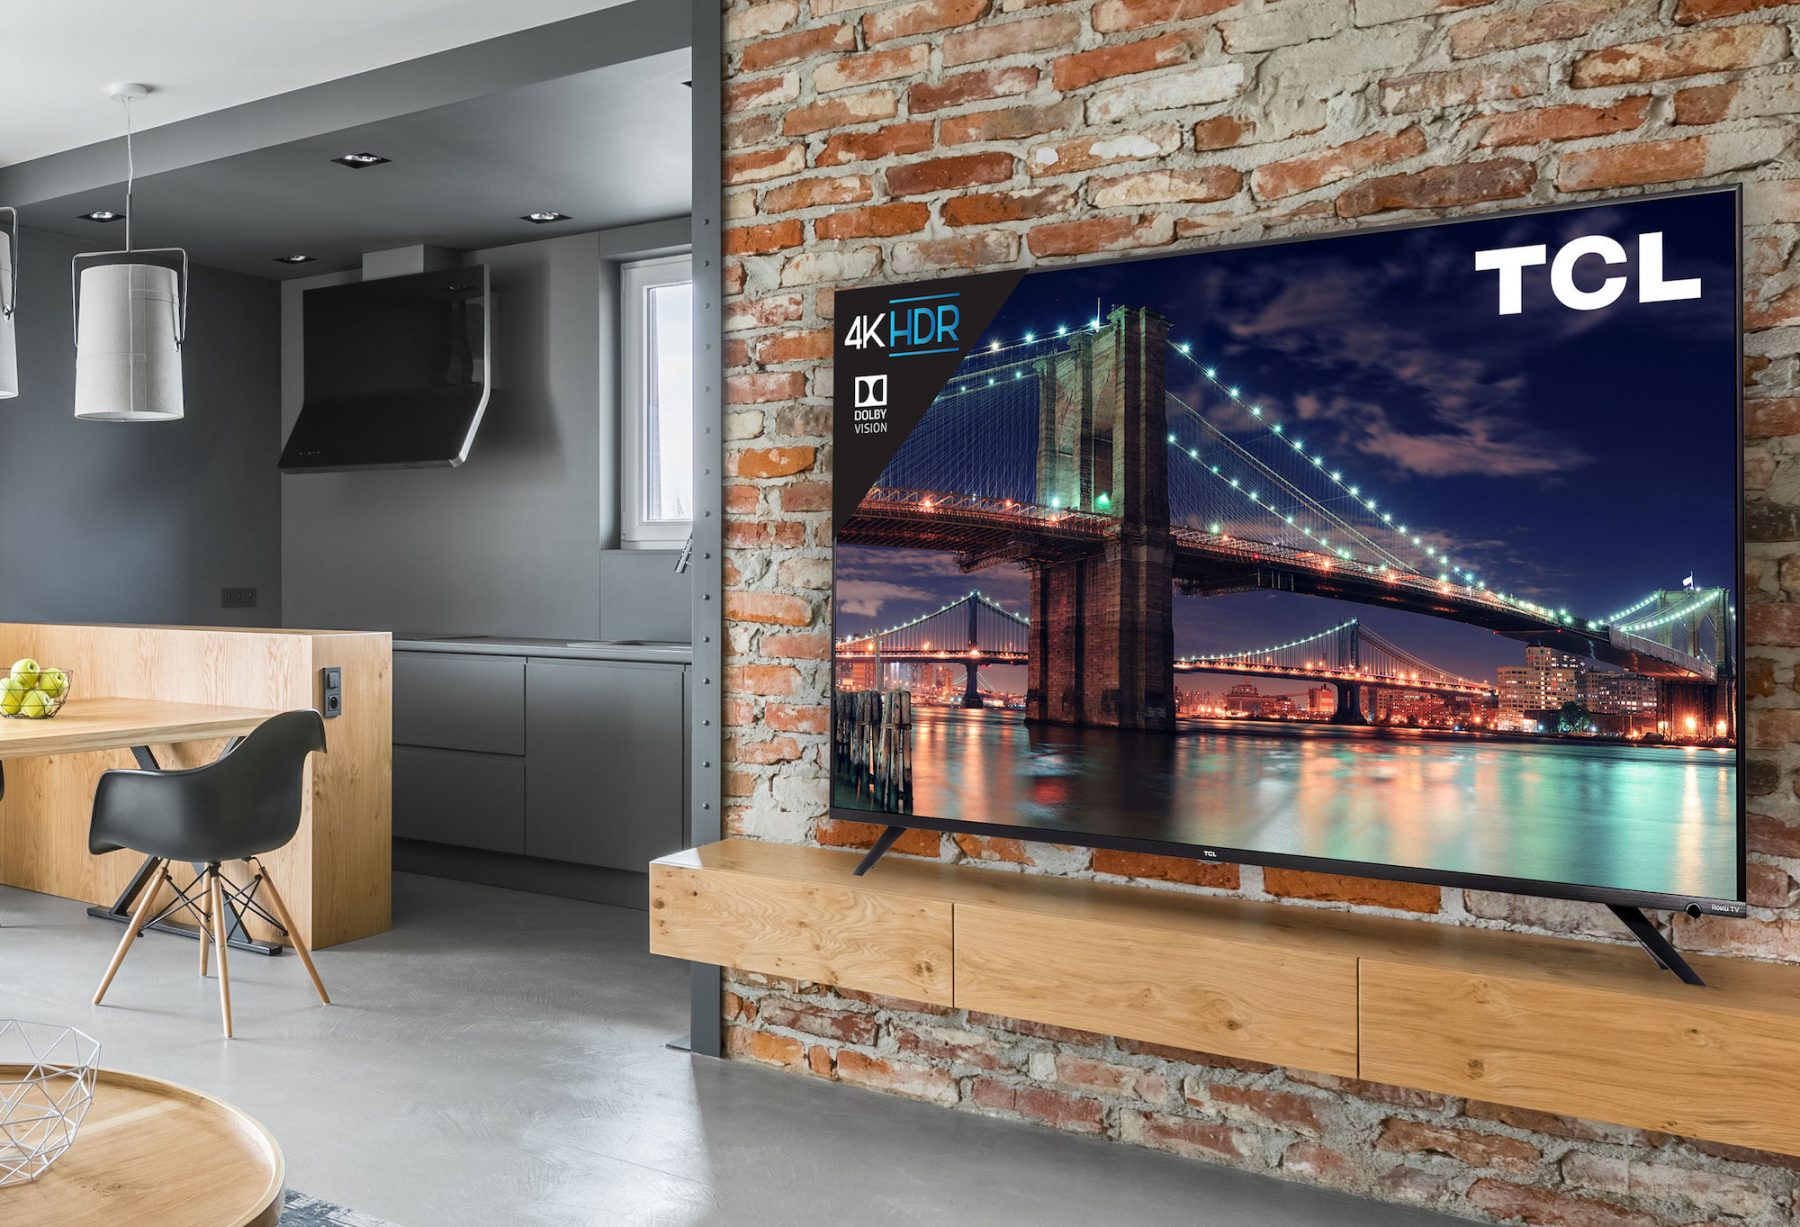 2018 will be the year that great TVs finally cheap BGR